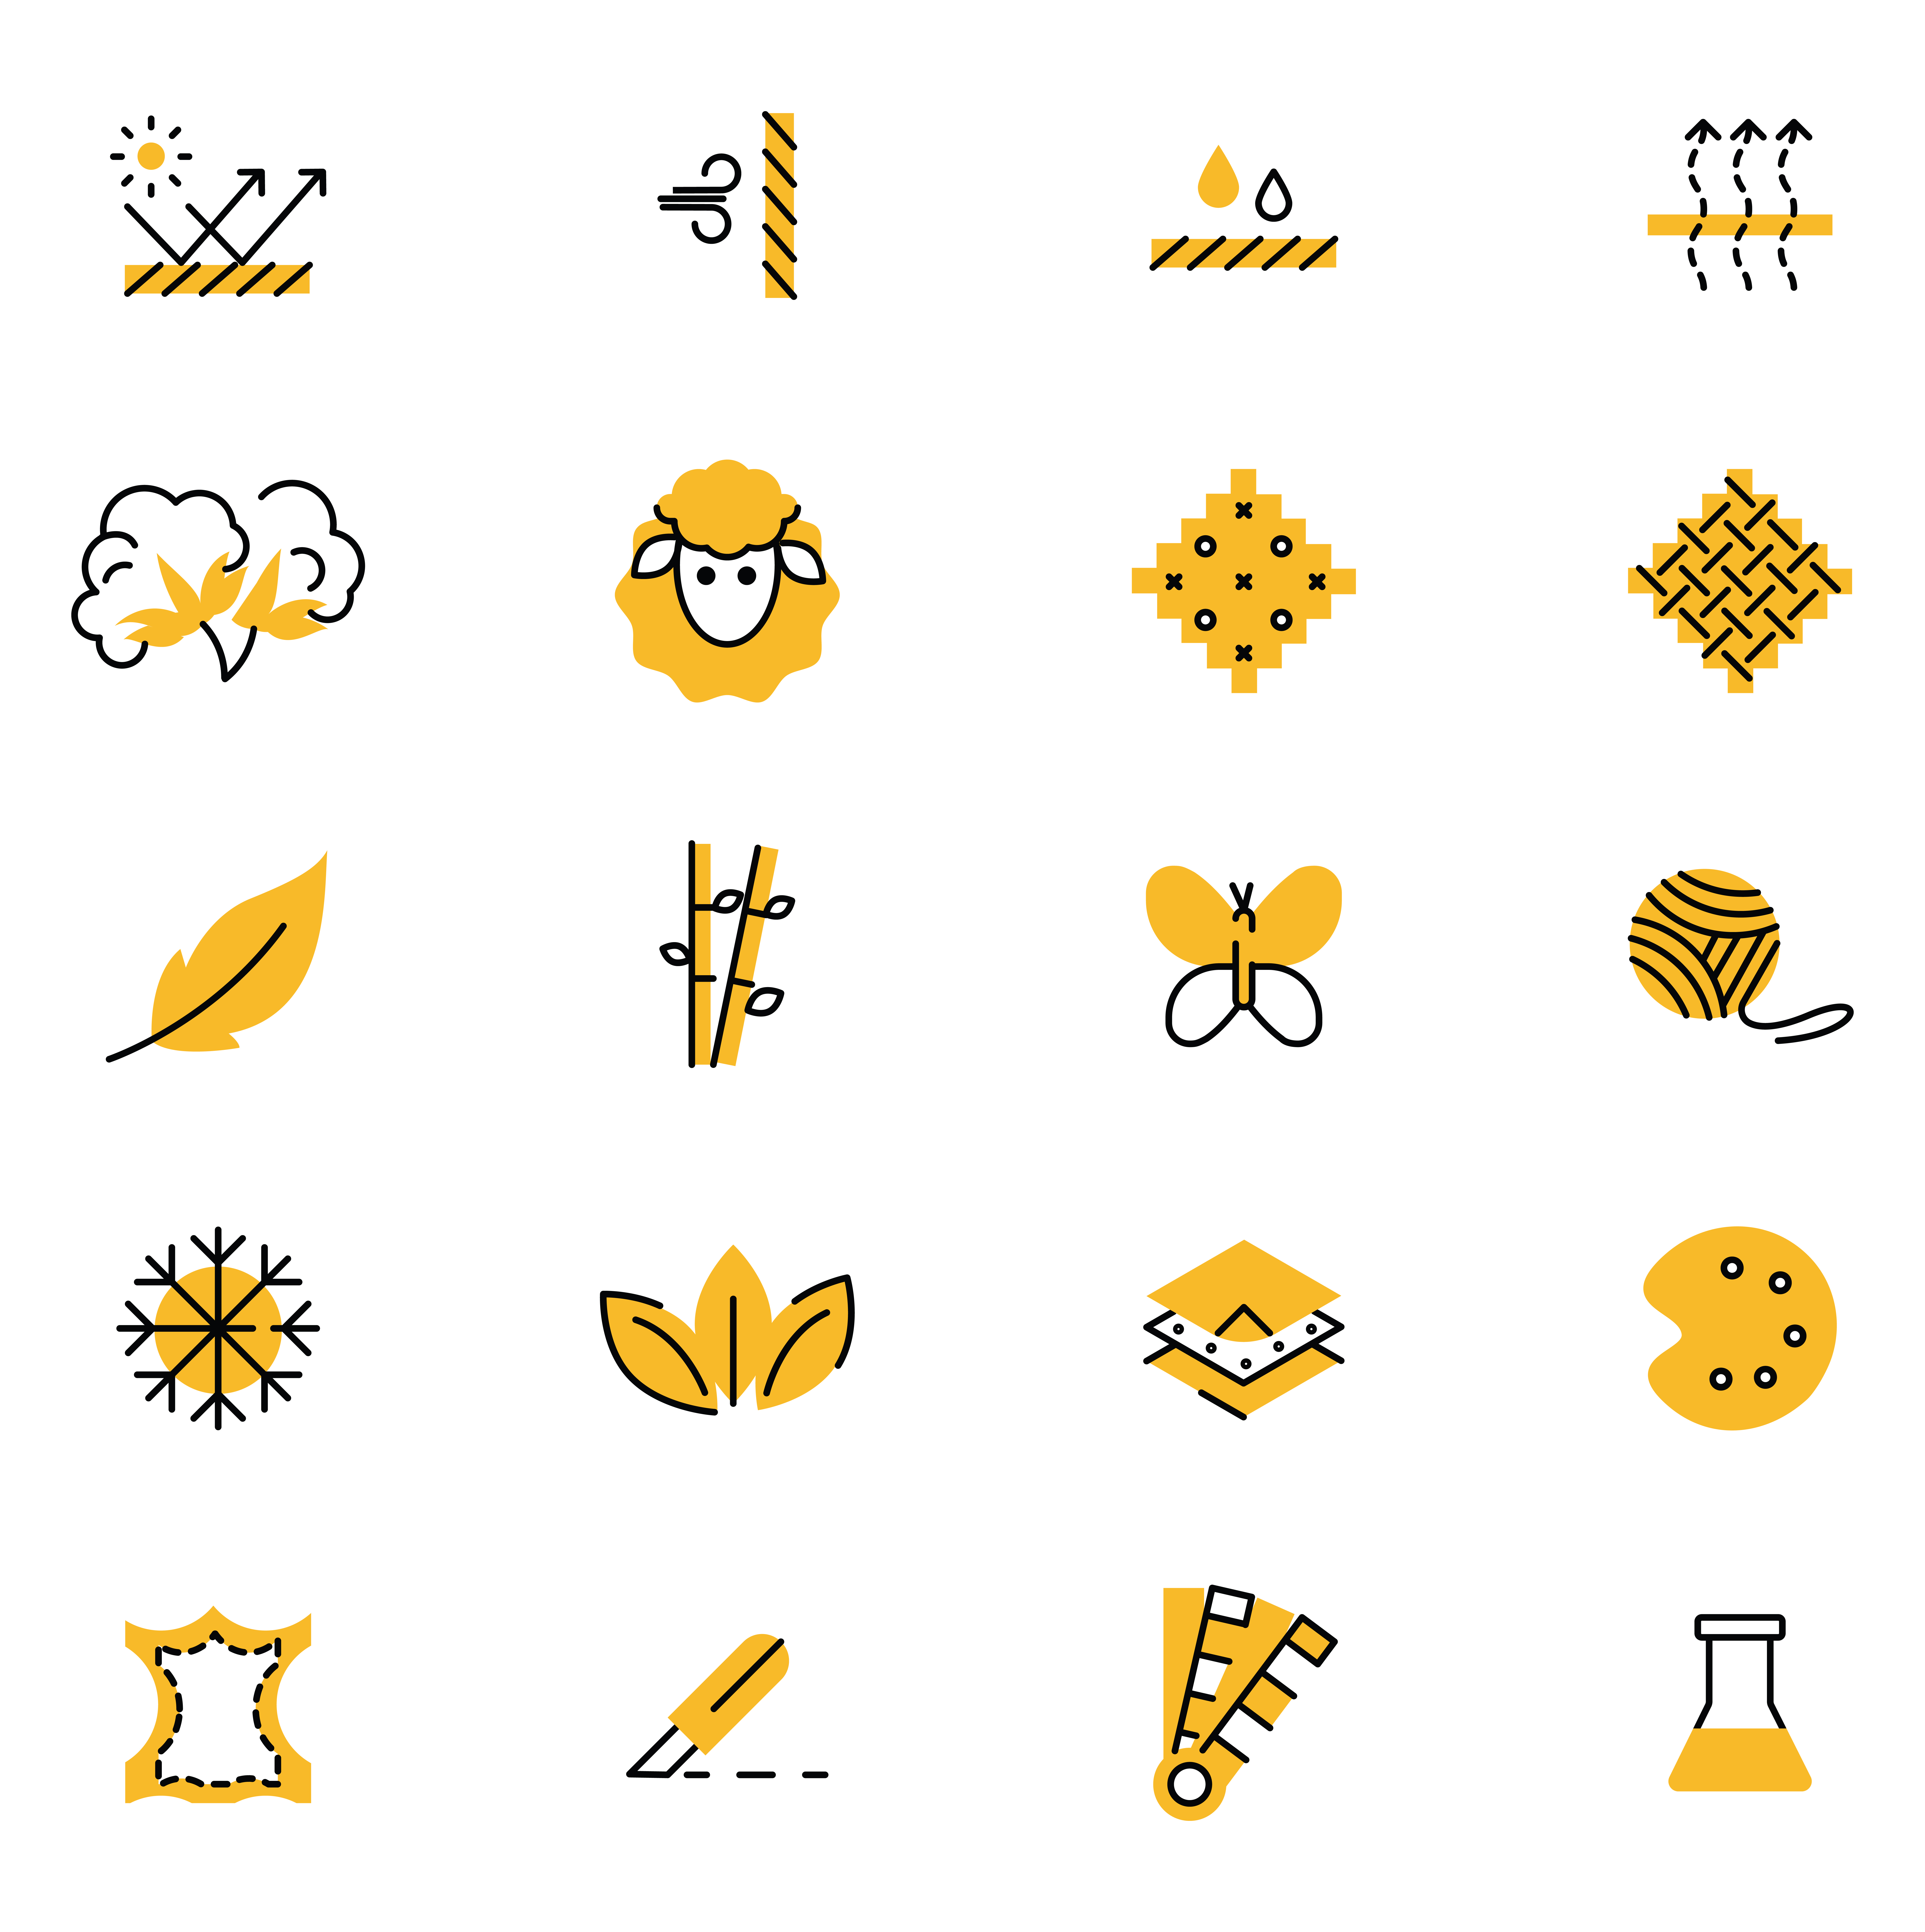 Bunch of different types of symbols on a white background.